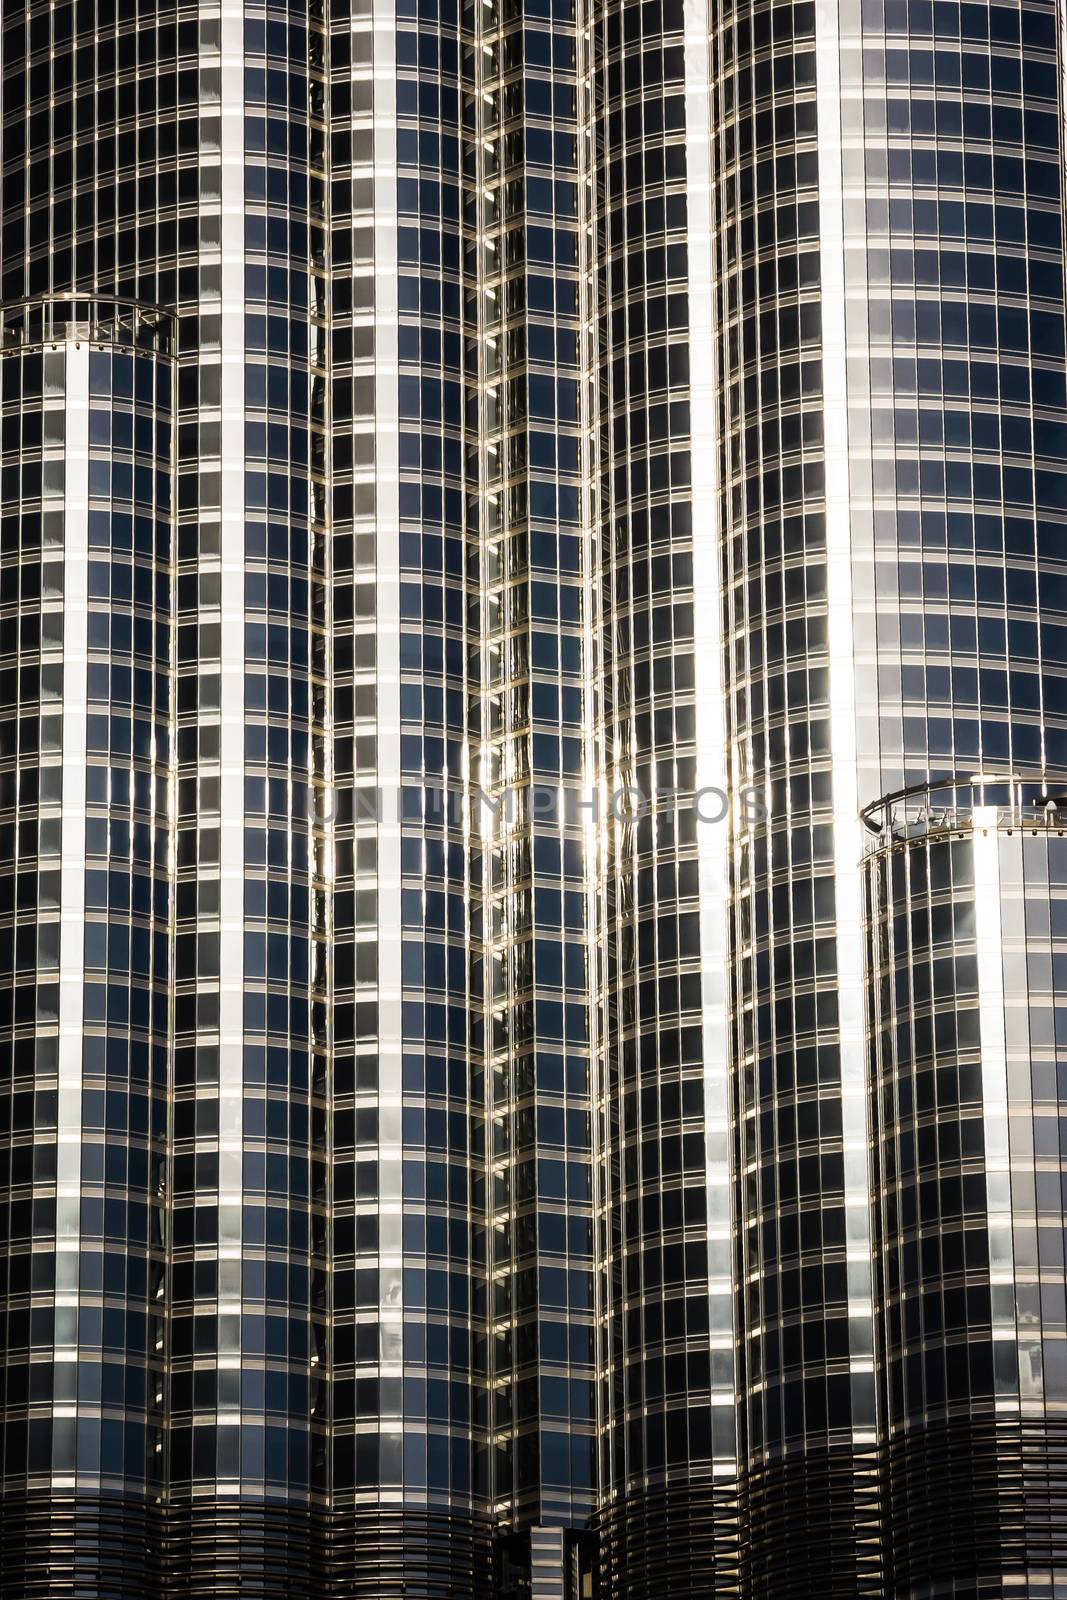 Closeup of Burj Khalifa, main landmark of Dubai, on February 03, 2013. The tallest man-made structure in the world, at 829.8 m, designed by Skidmore, Owings and Merrill firm.